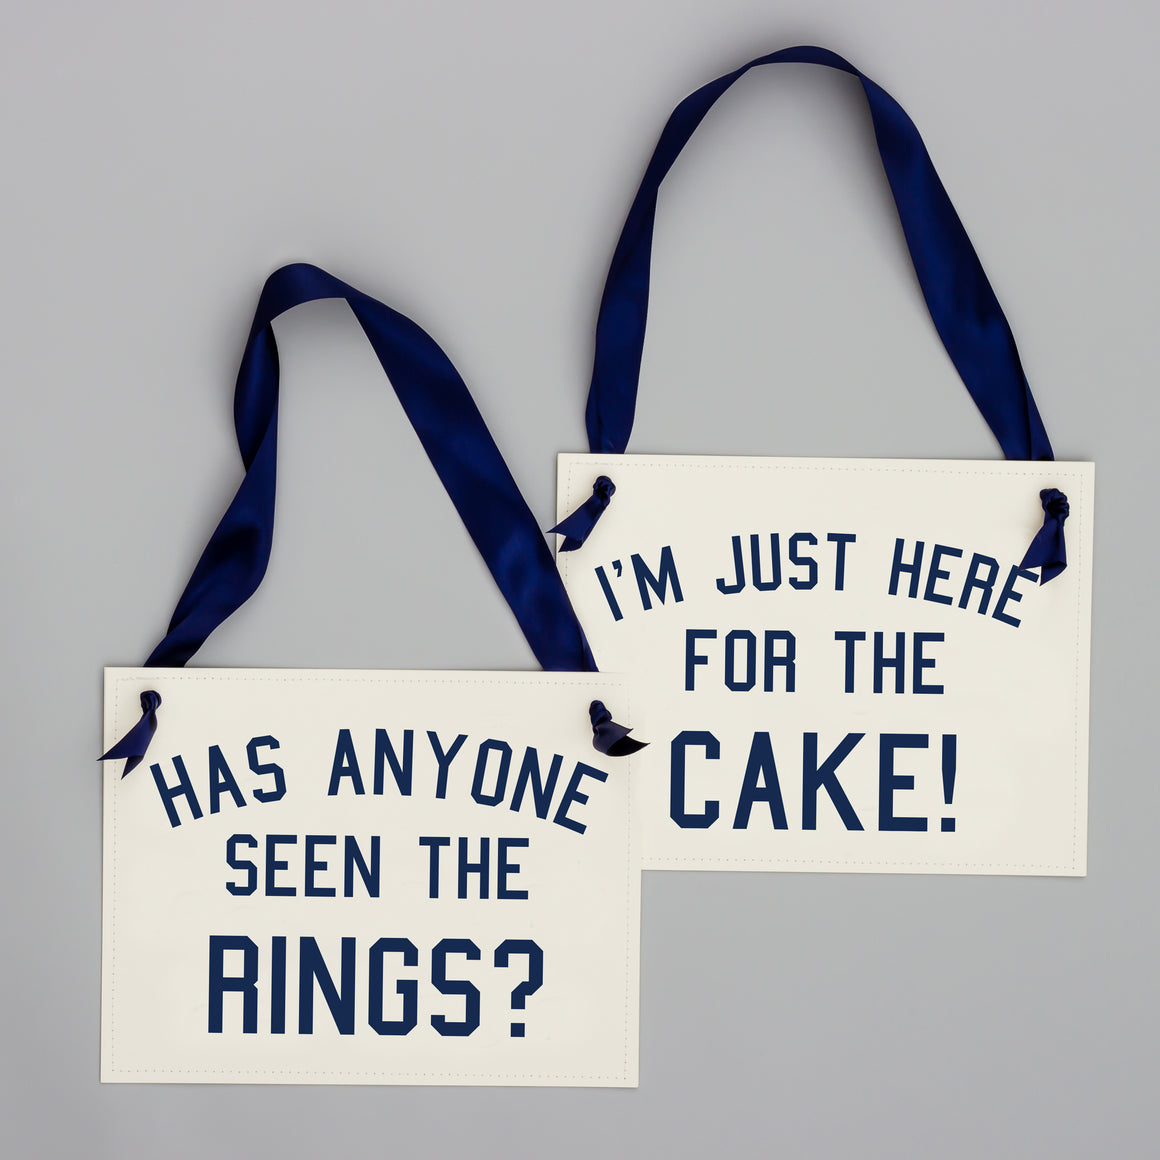 I'm Just Here For The Cake + Has Anyone Seen The Rings Set Navy Blue